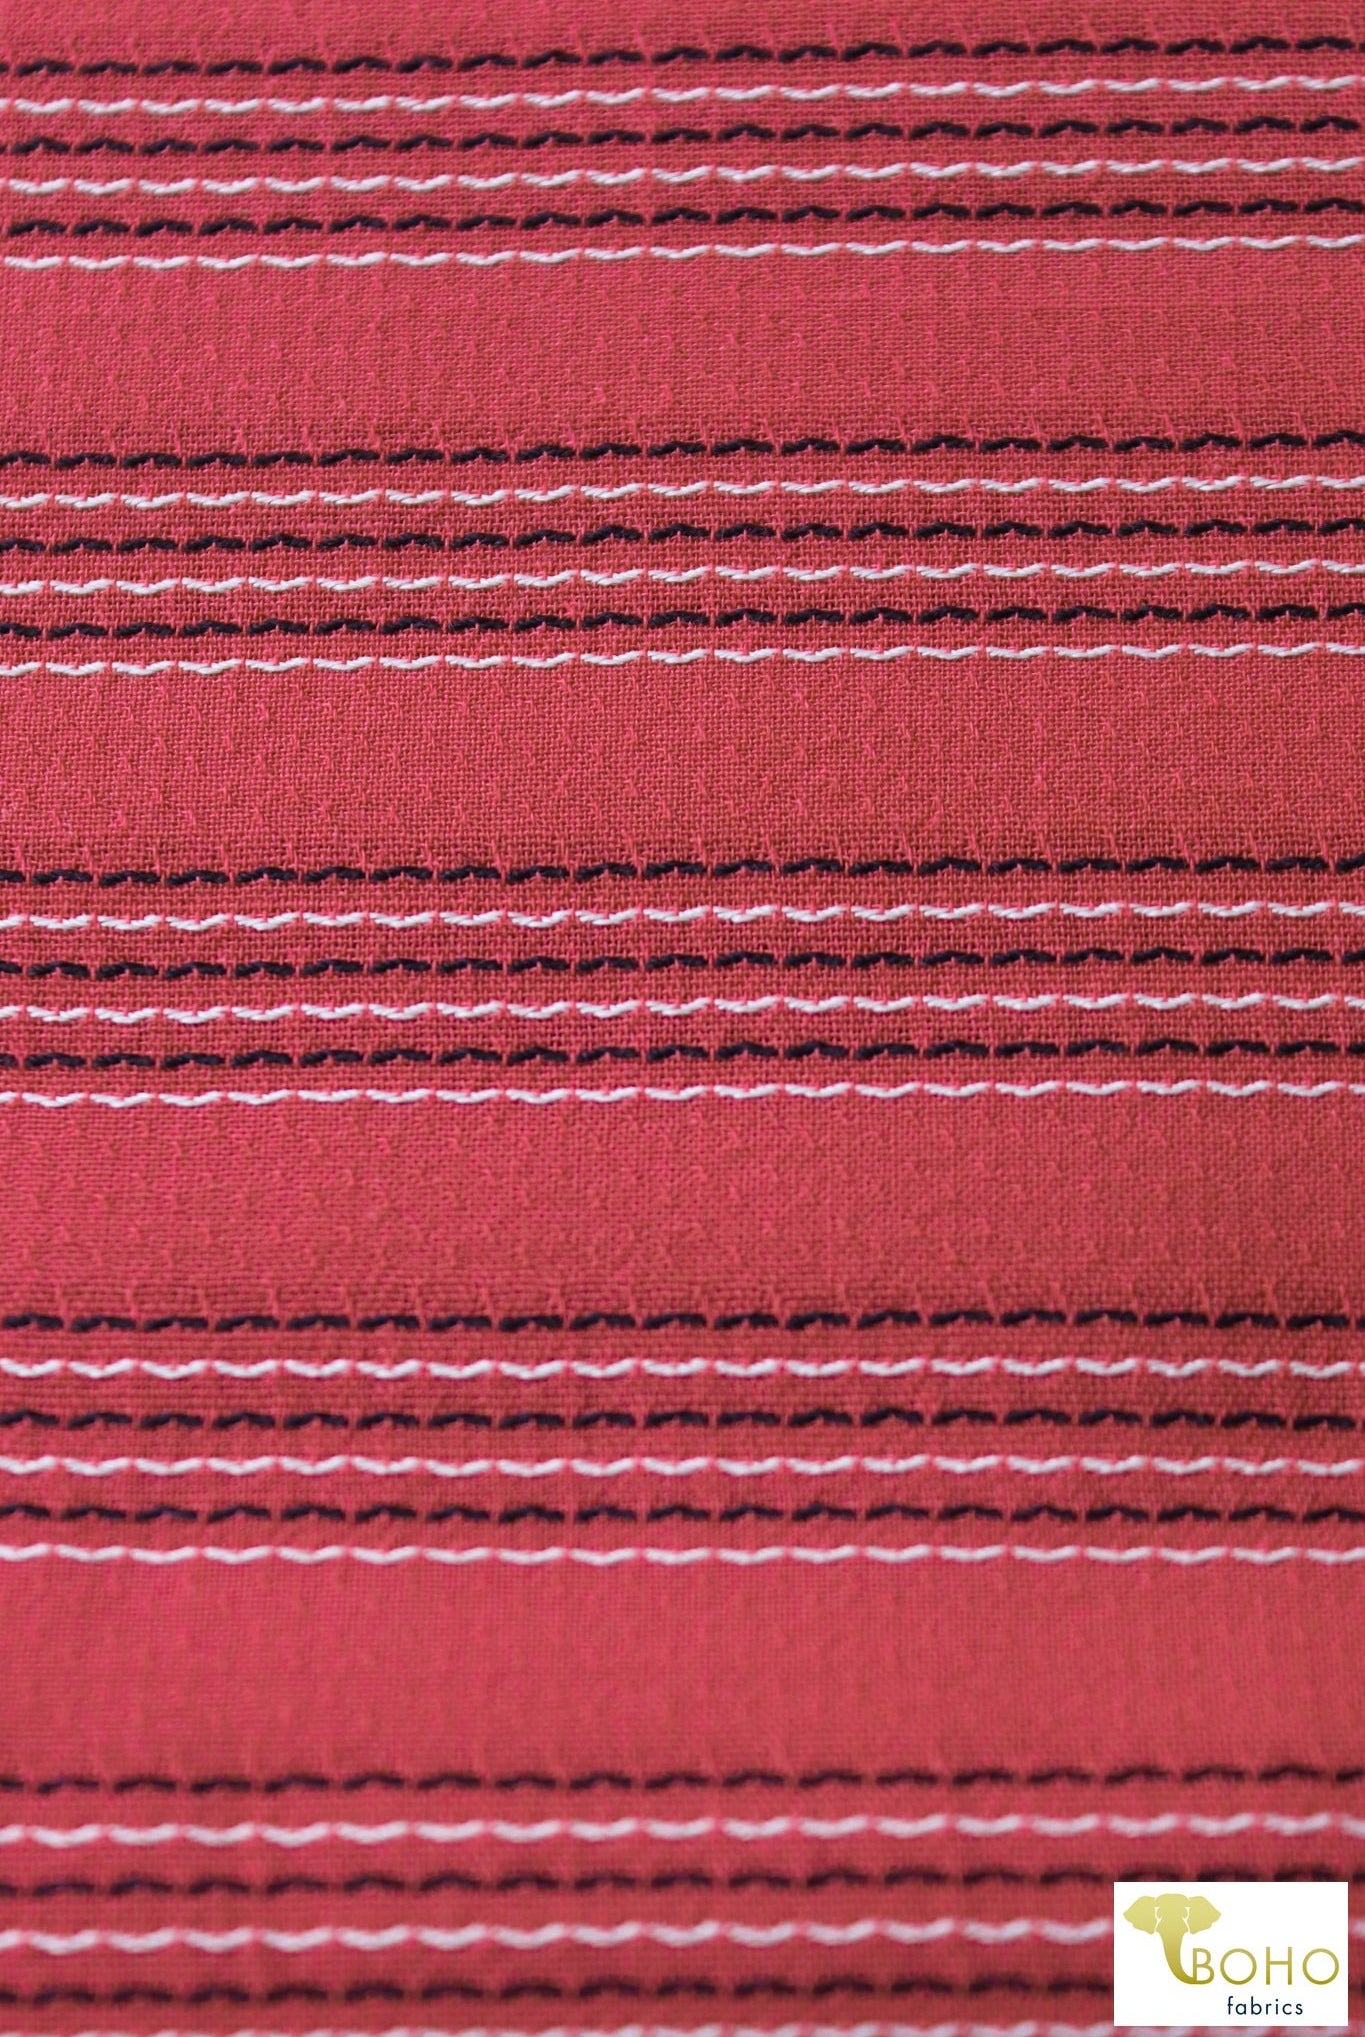 Red Pacific Coast Highway Stripes. Embroidered Stripes on Red Woven Fabric. WVS-308-RED - Boho Fabrics